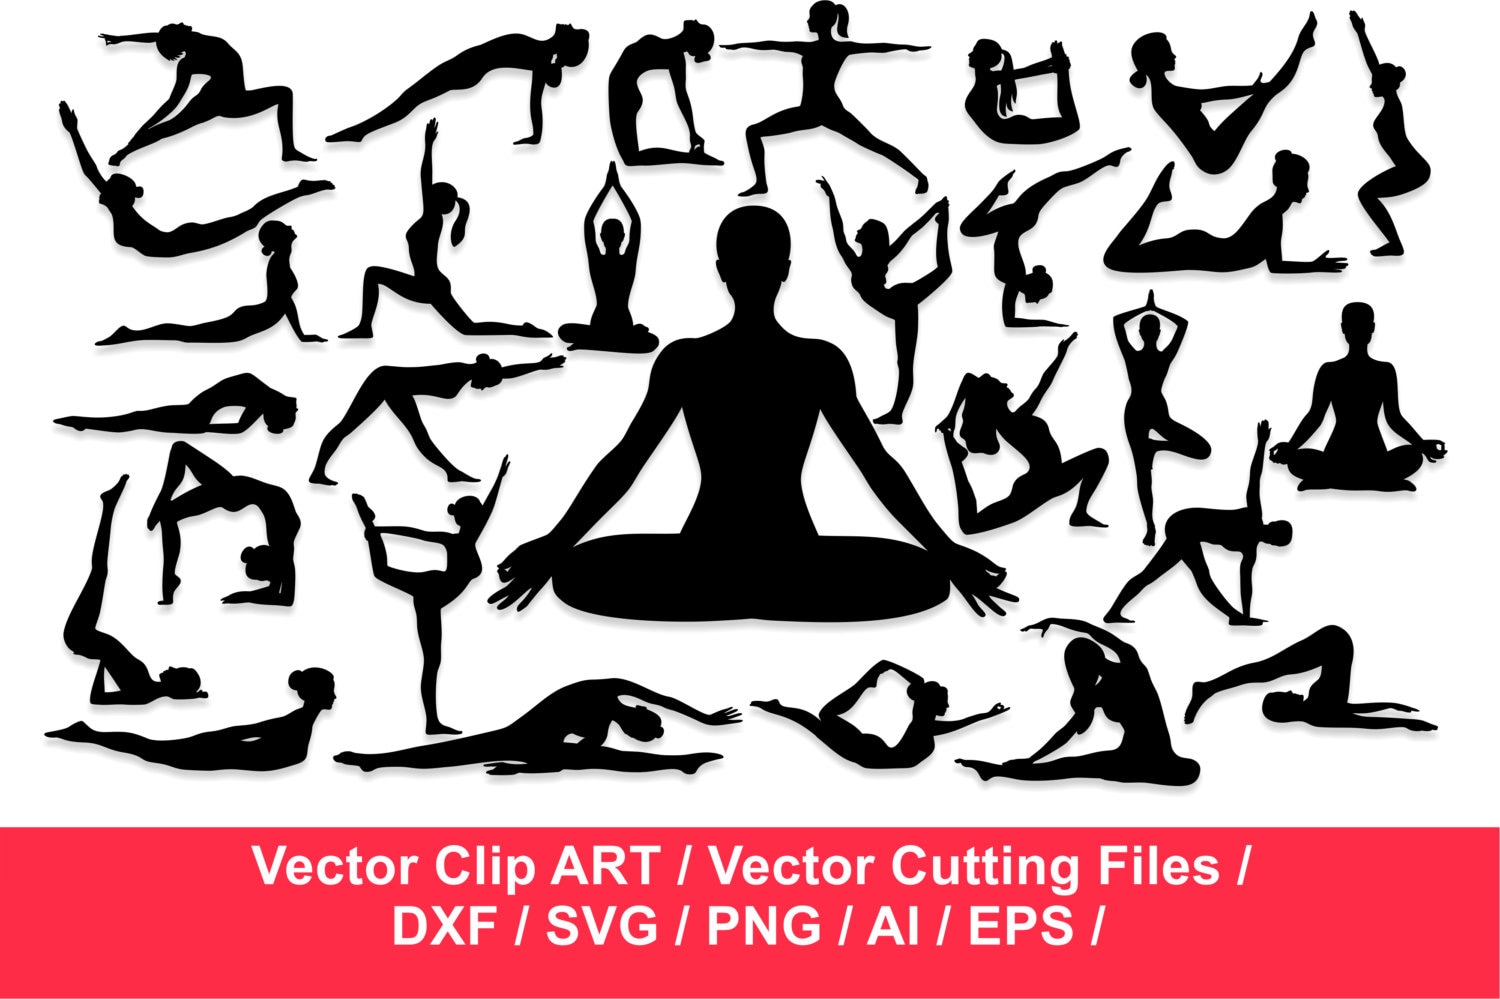 Download Yoga Silhouettes / Workout Silhouette / Exercise Silhouettes